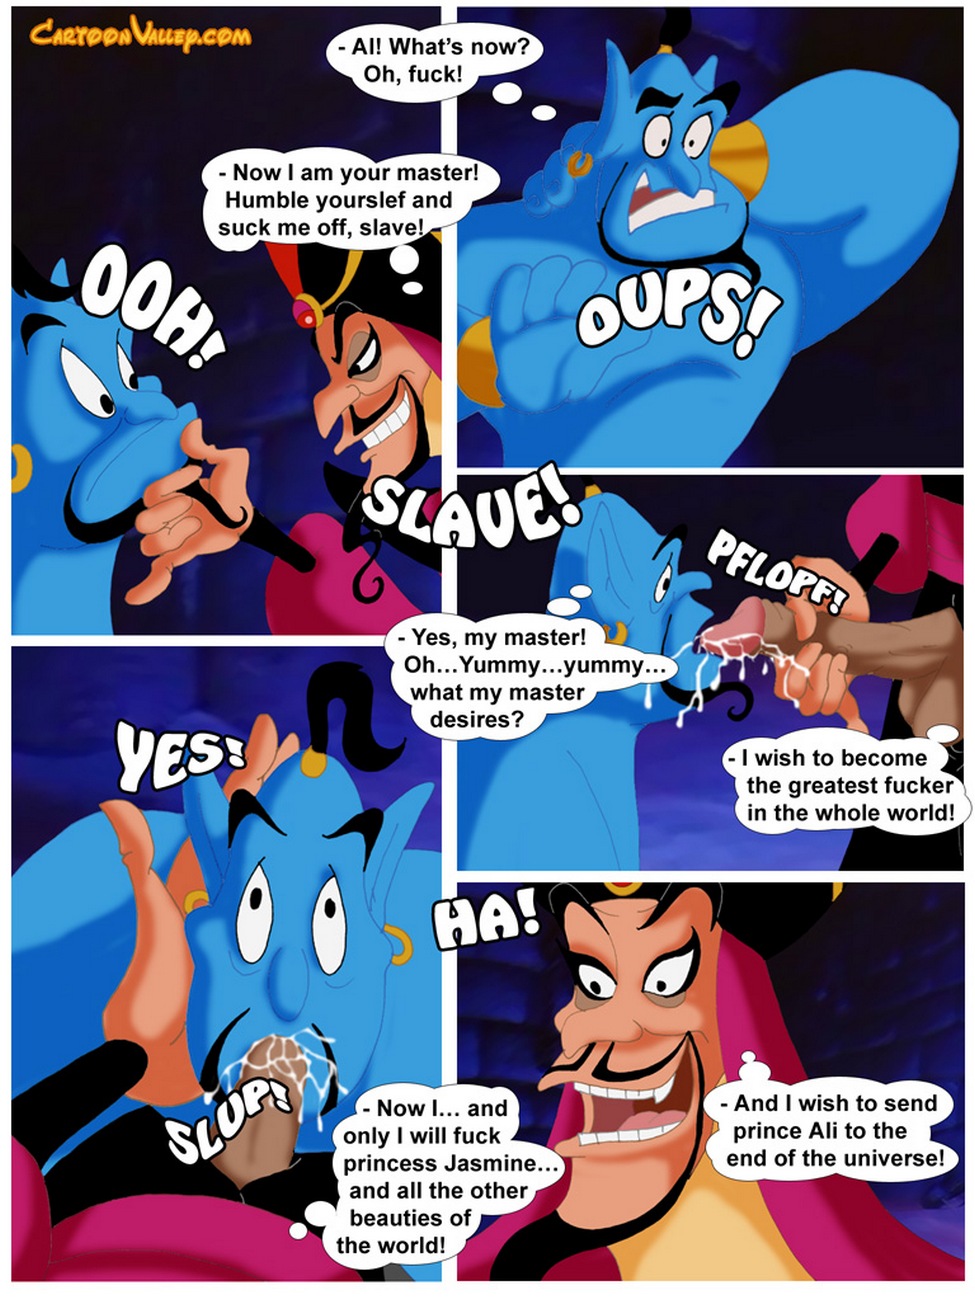 Aladdin - The Fucker From Agrabah - part 5